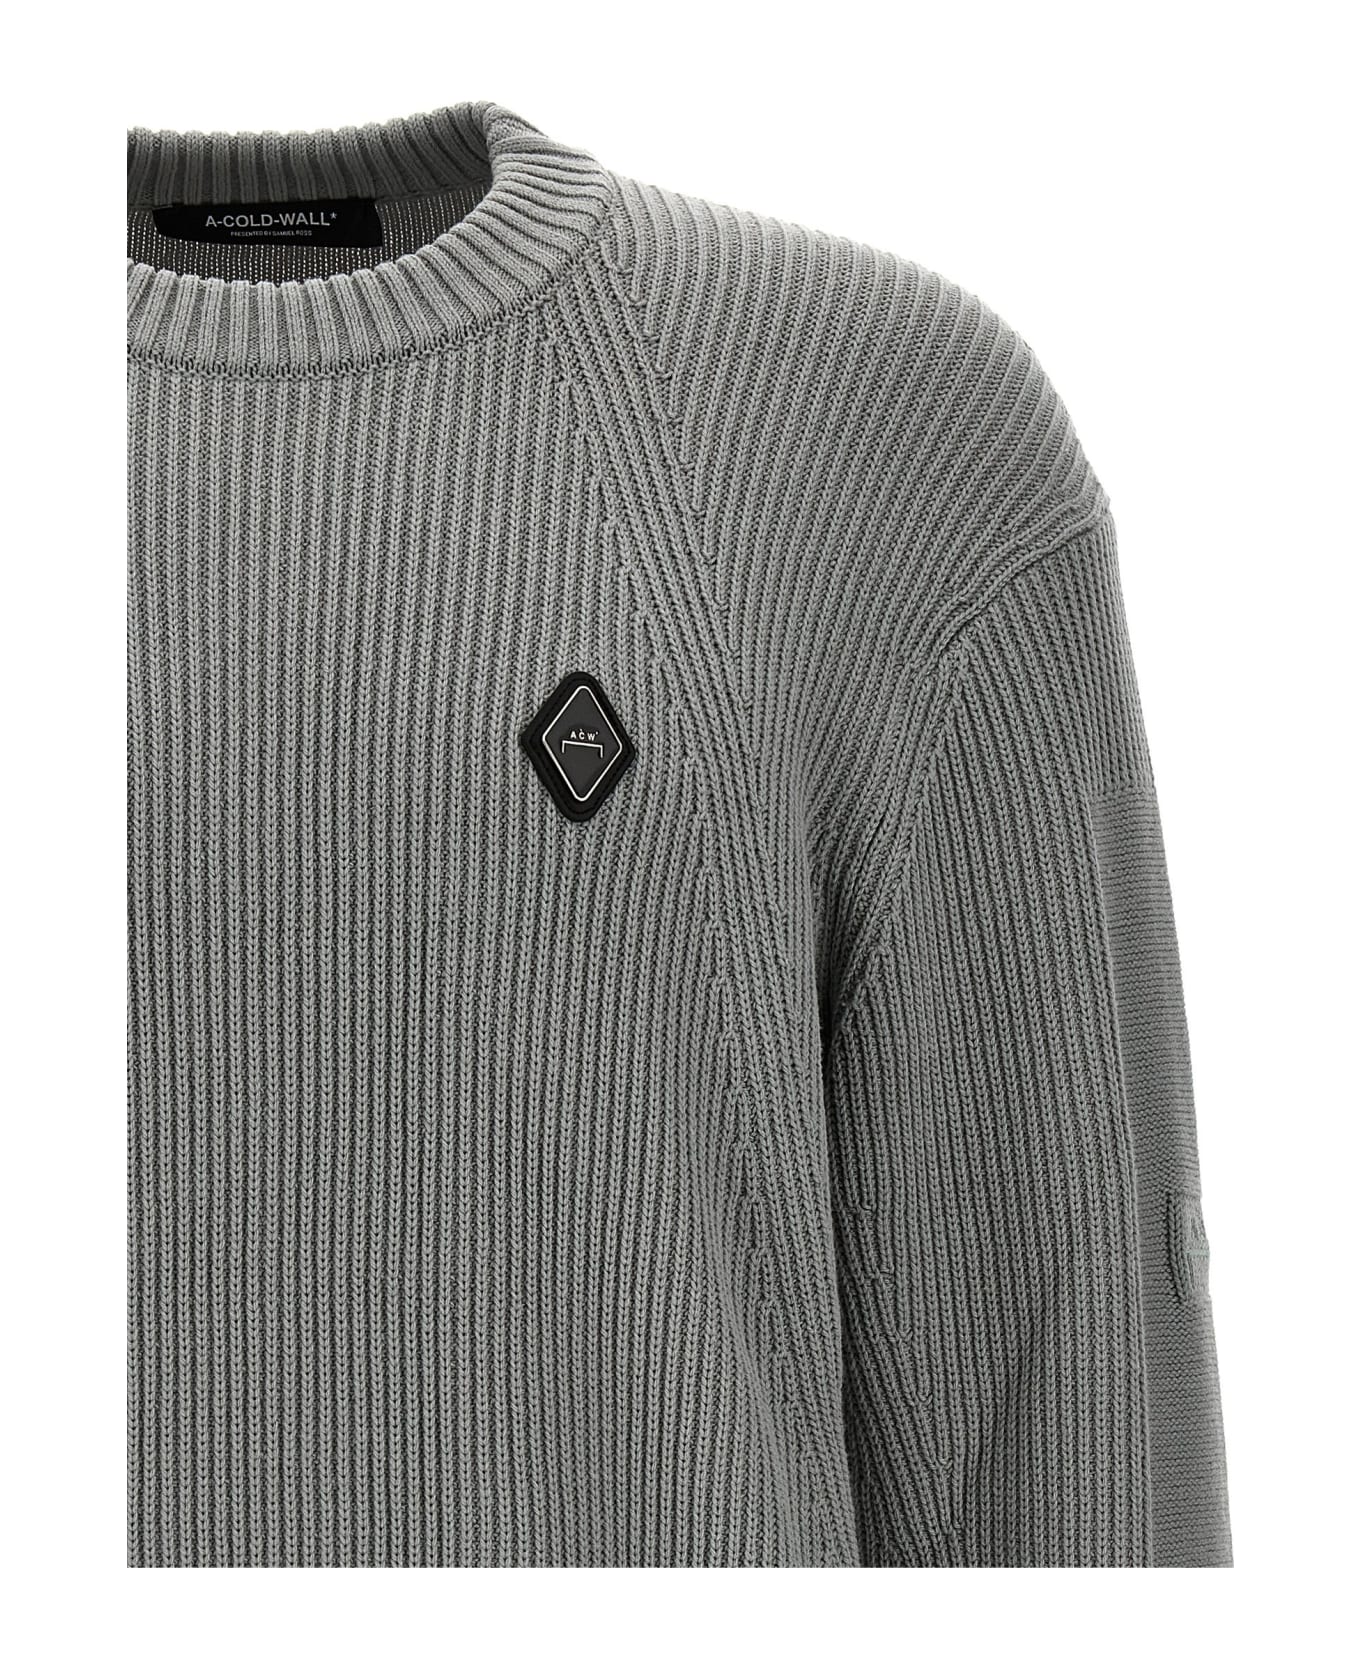 A-COLD-WALL 'fisherman' Sweater - Gray ニットウェア